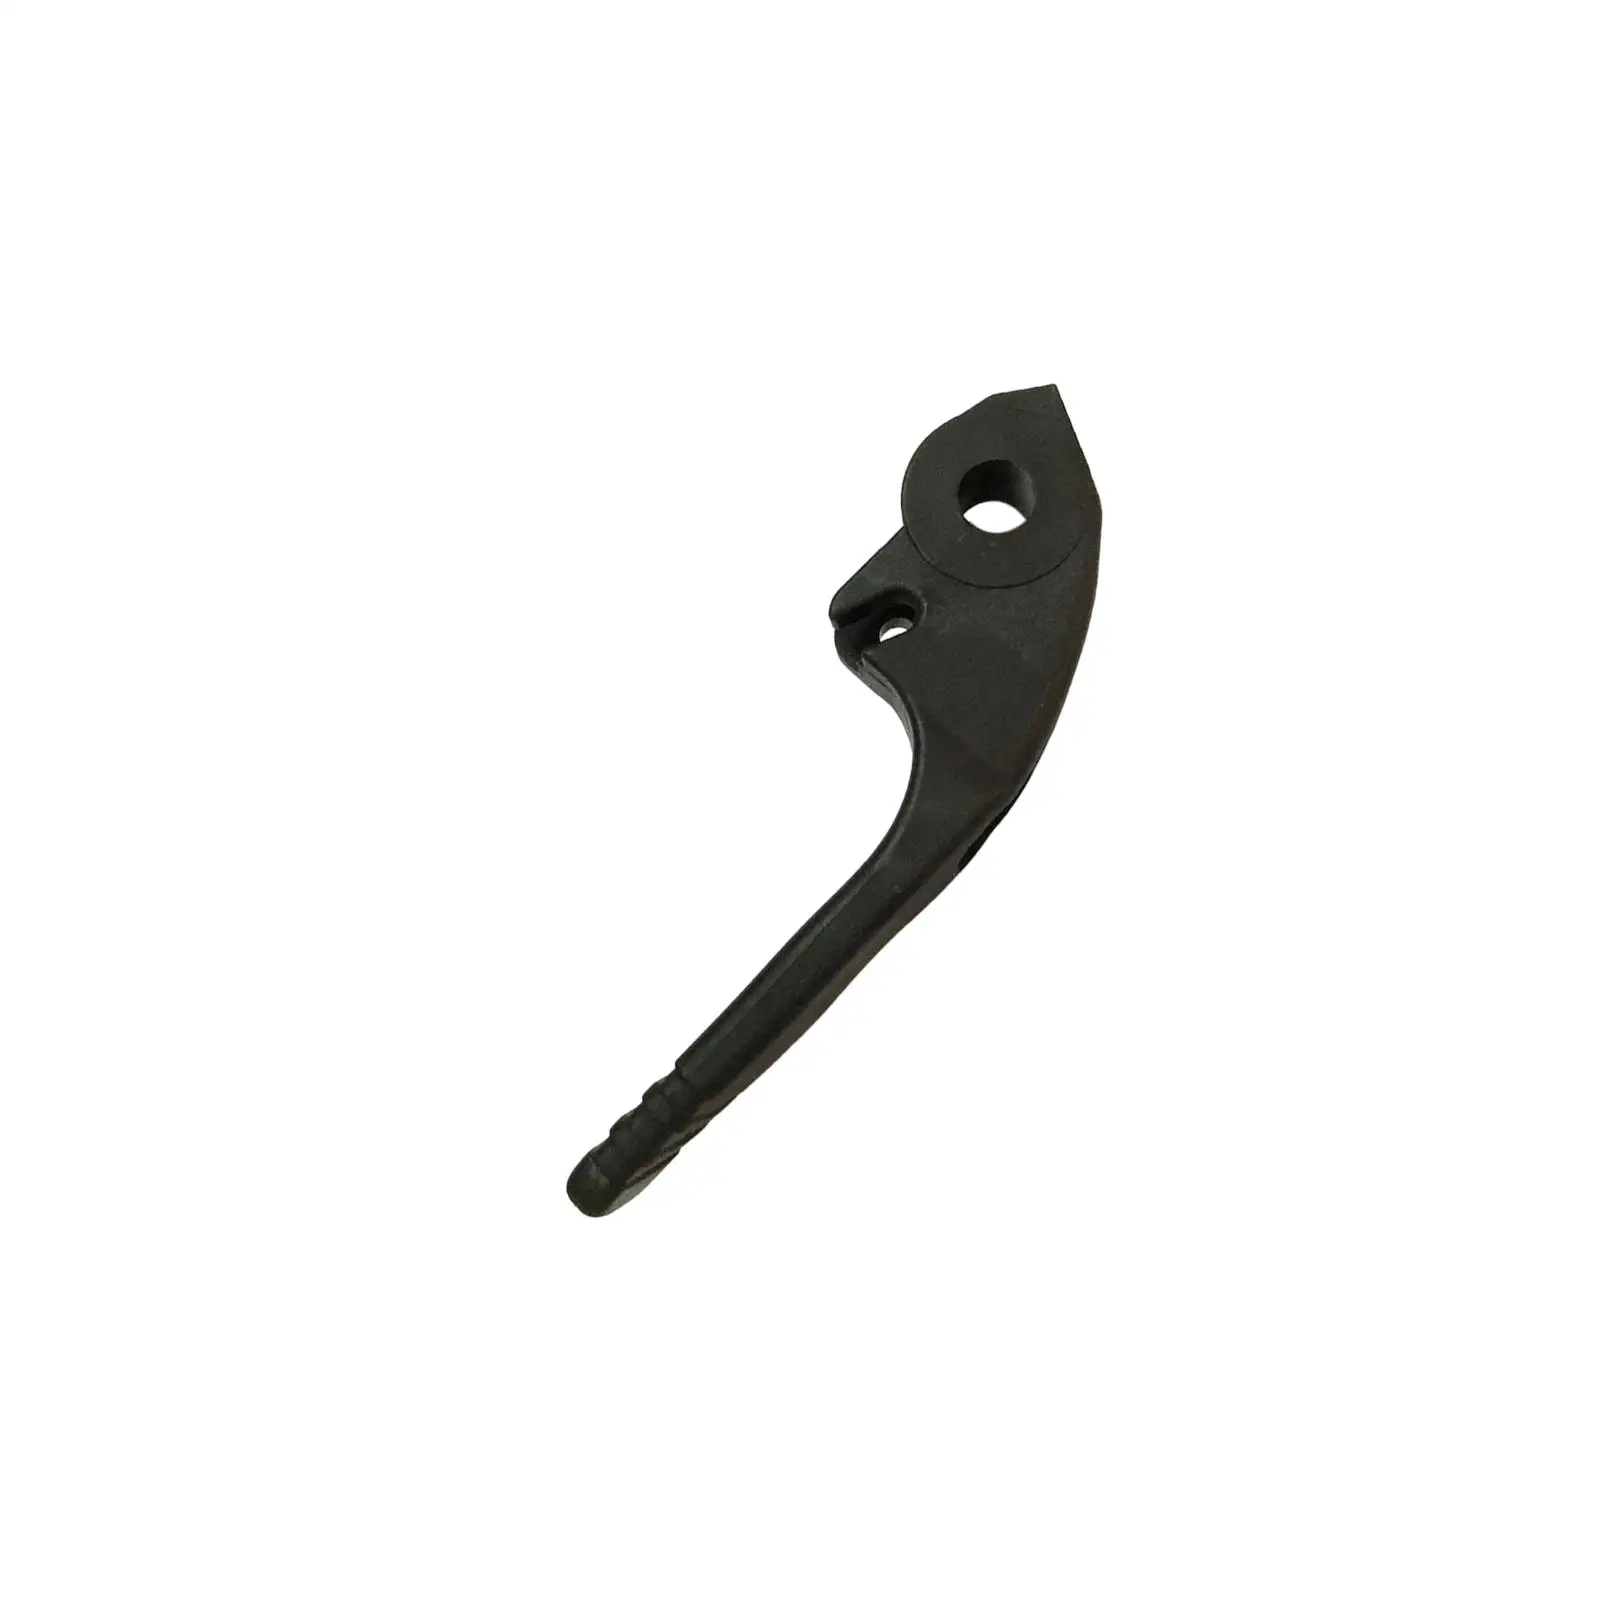 Shifter Shift Lever 63V4411100 for Outboard Engine 9.9HP 15HP Stable Performance Vehicle Repair Parts Replacement Durable